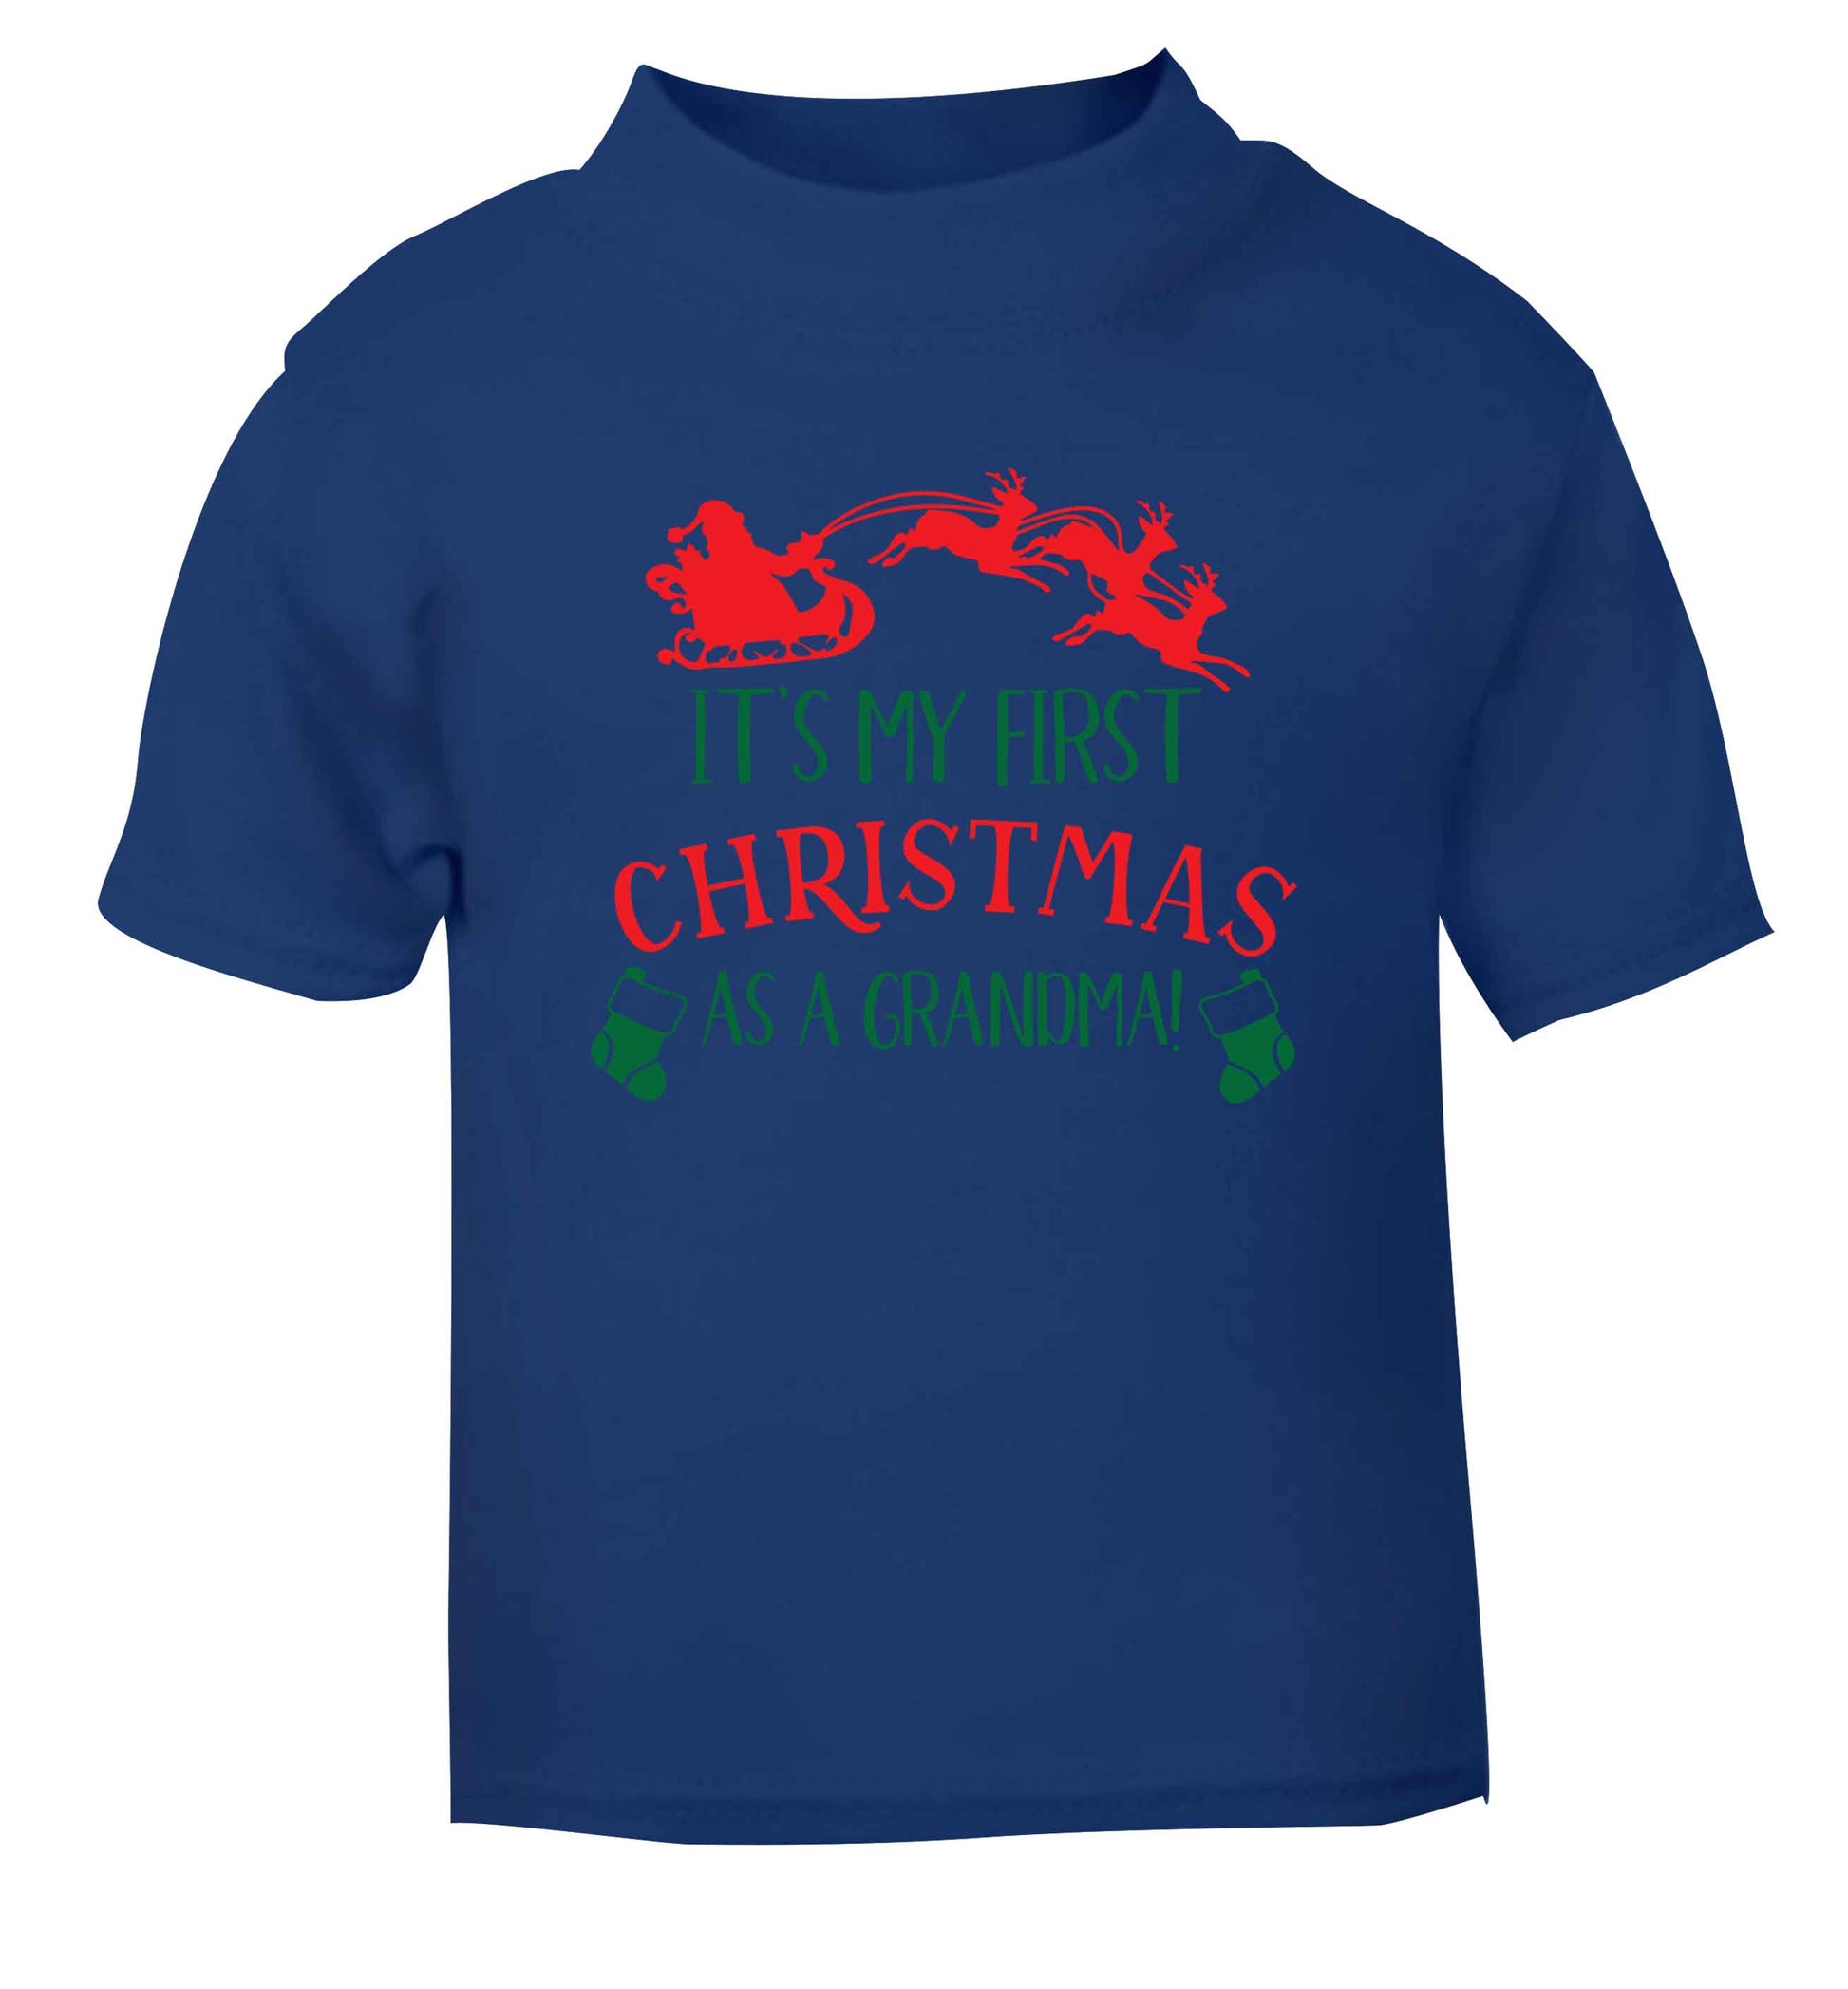 It's my first Christmas as a grandma! blue Baby Toddler Tshirt 2 Years